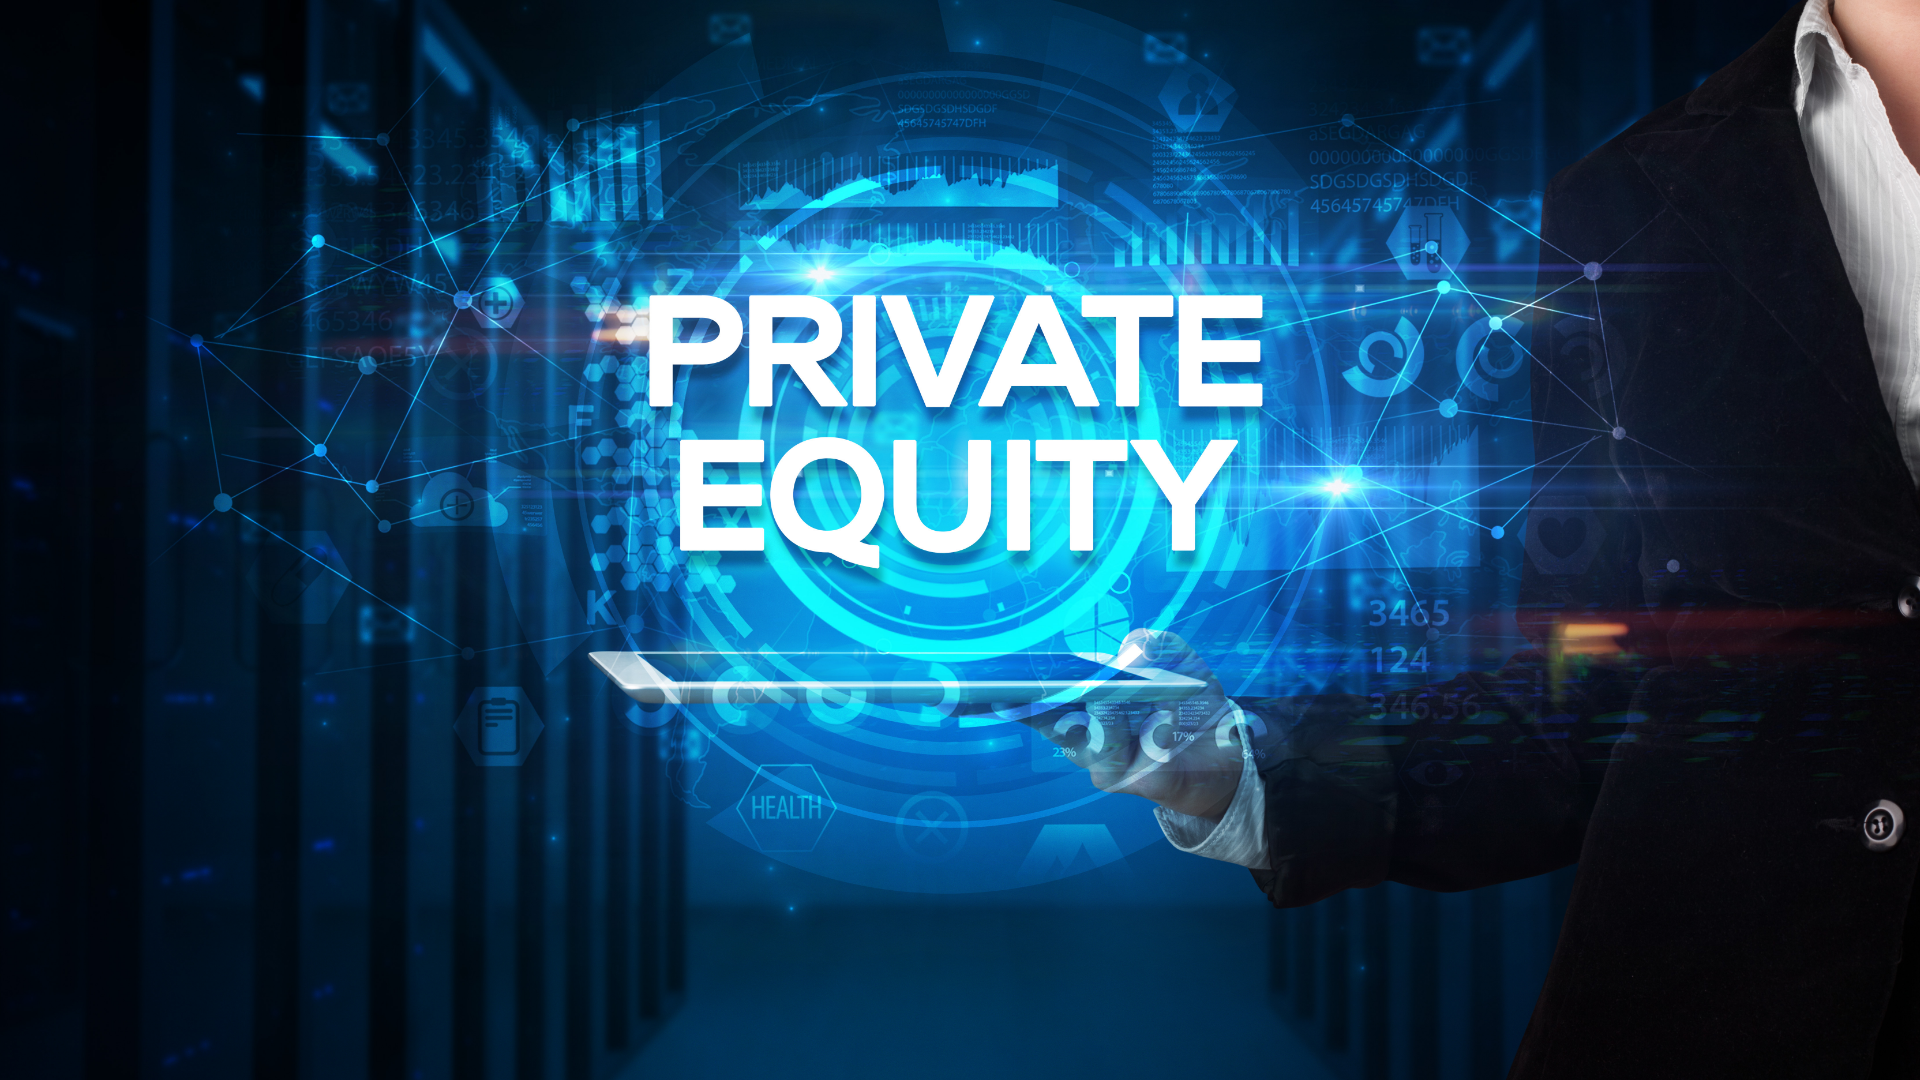 What Exactly Is Private Equity and Private Equity Funds?